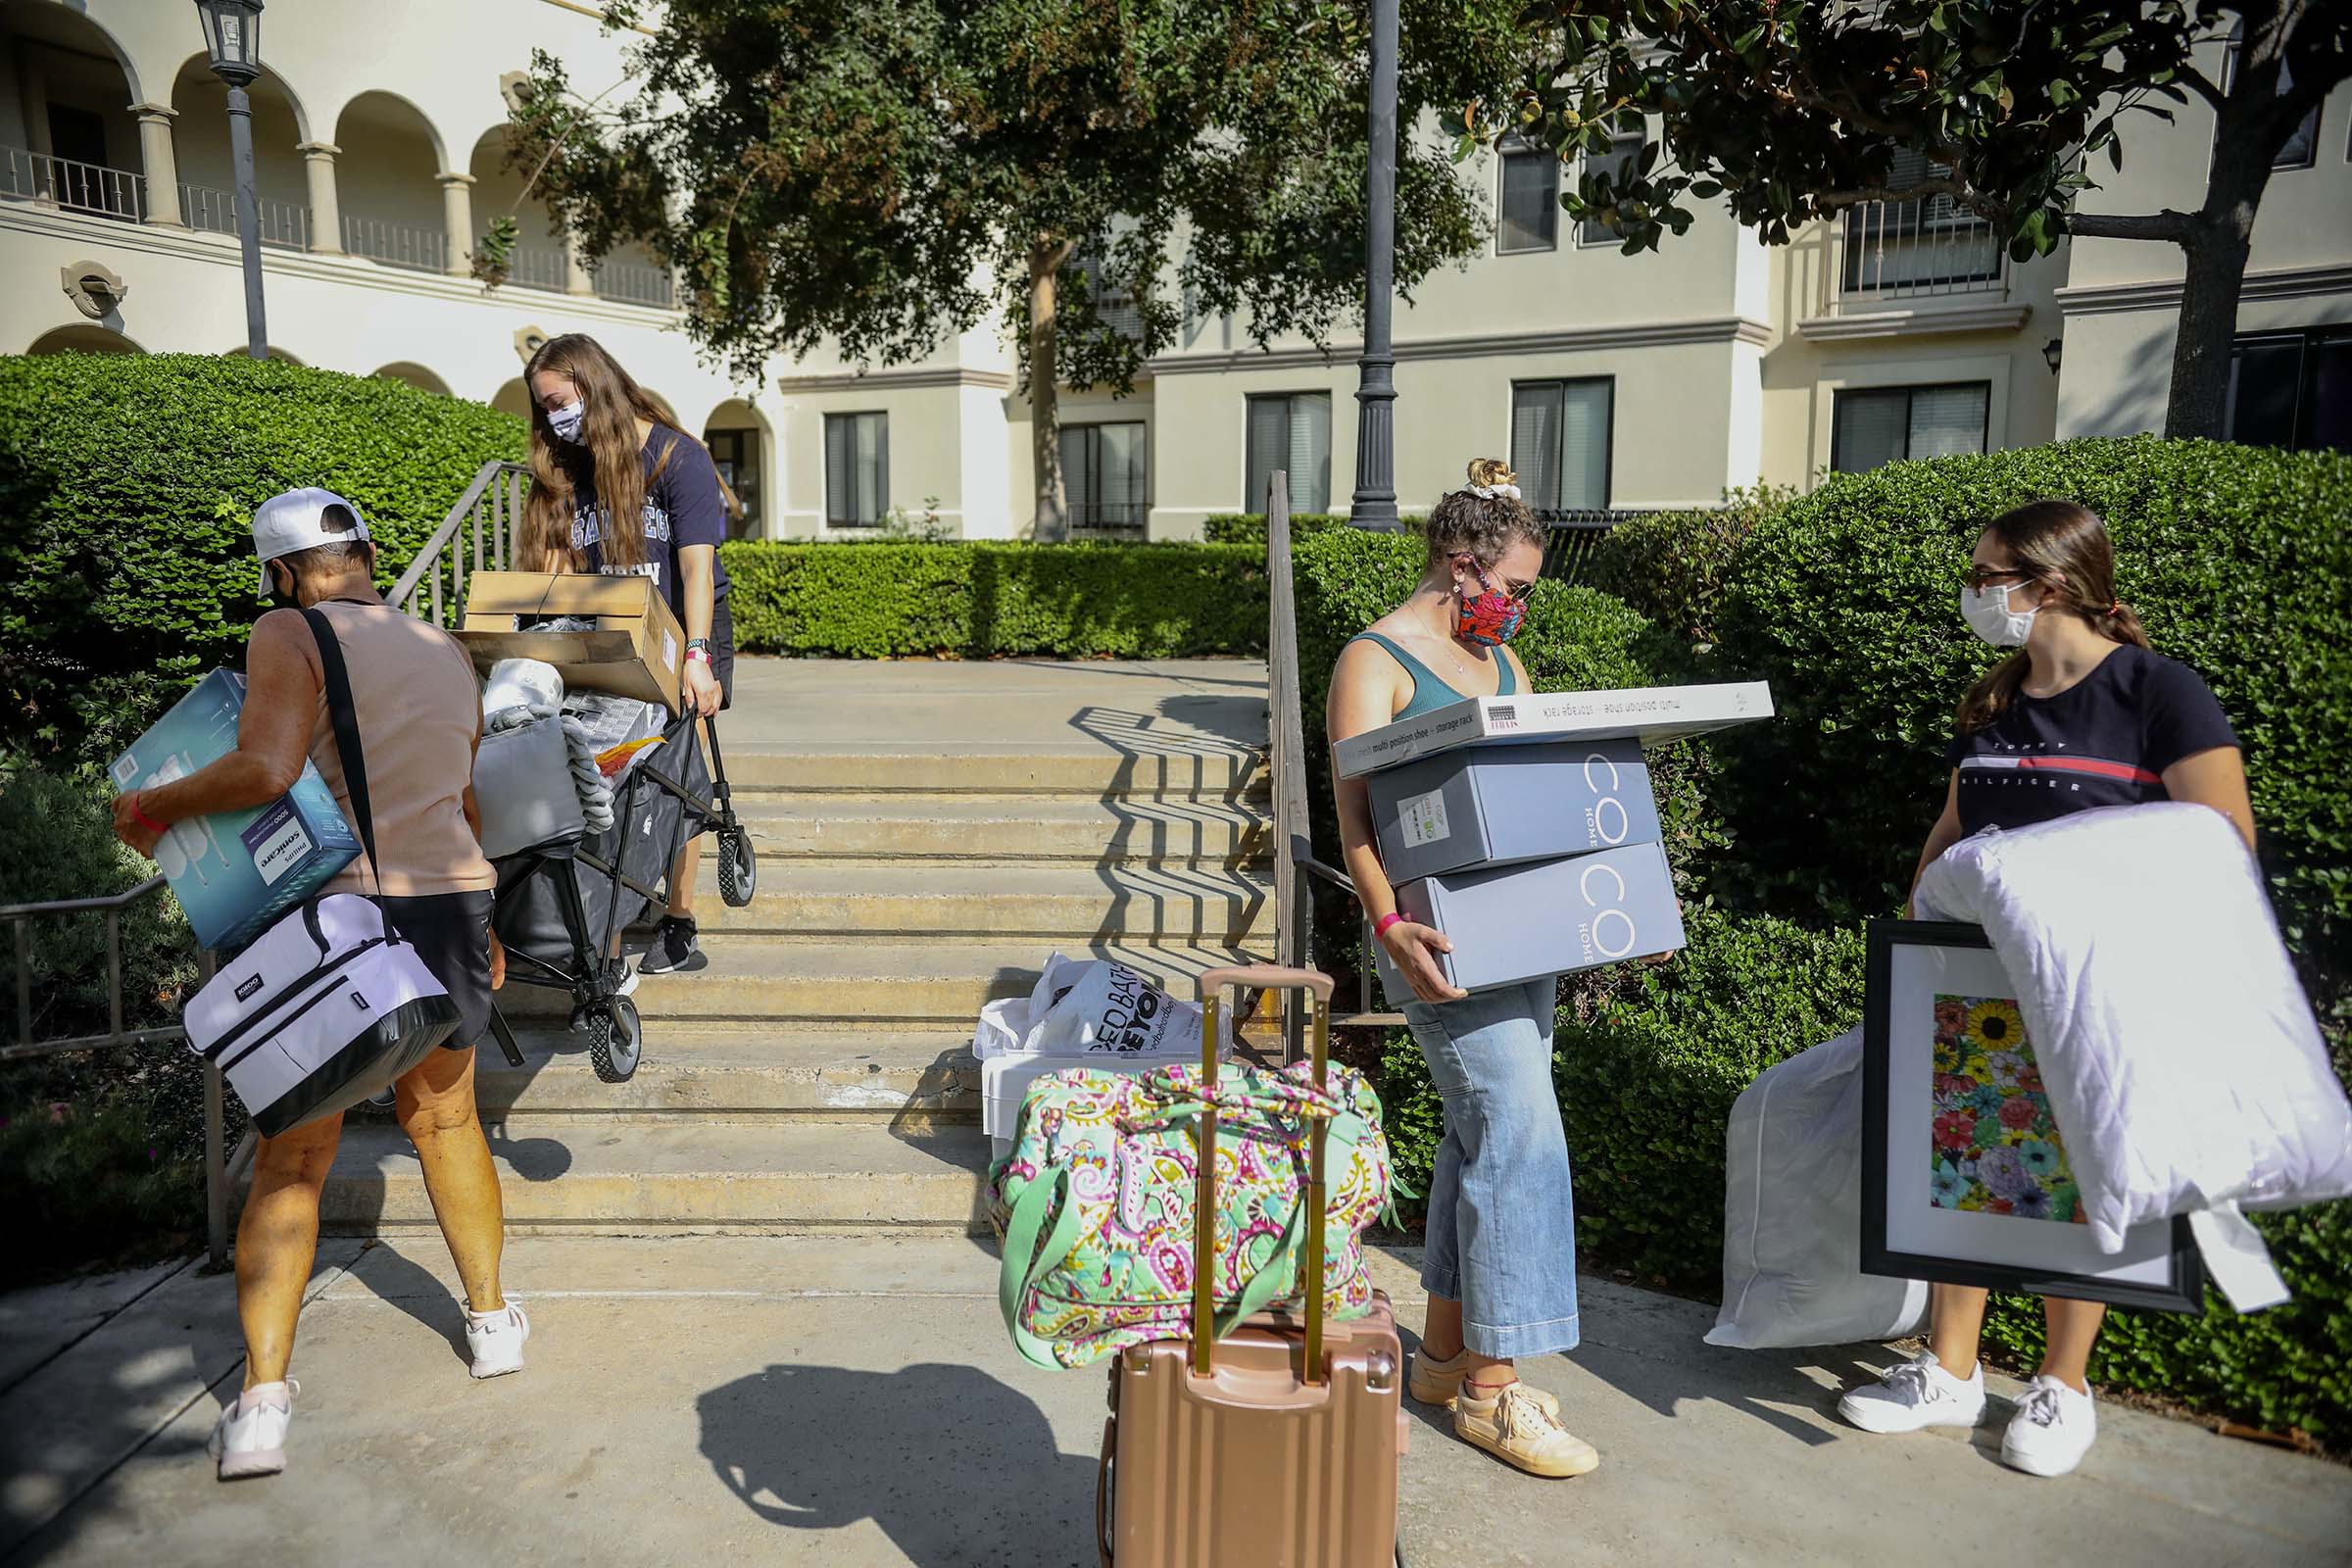 University of San Diego Move-In Day After COVID-19 Protocols